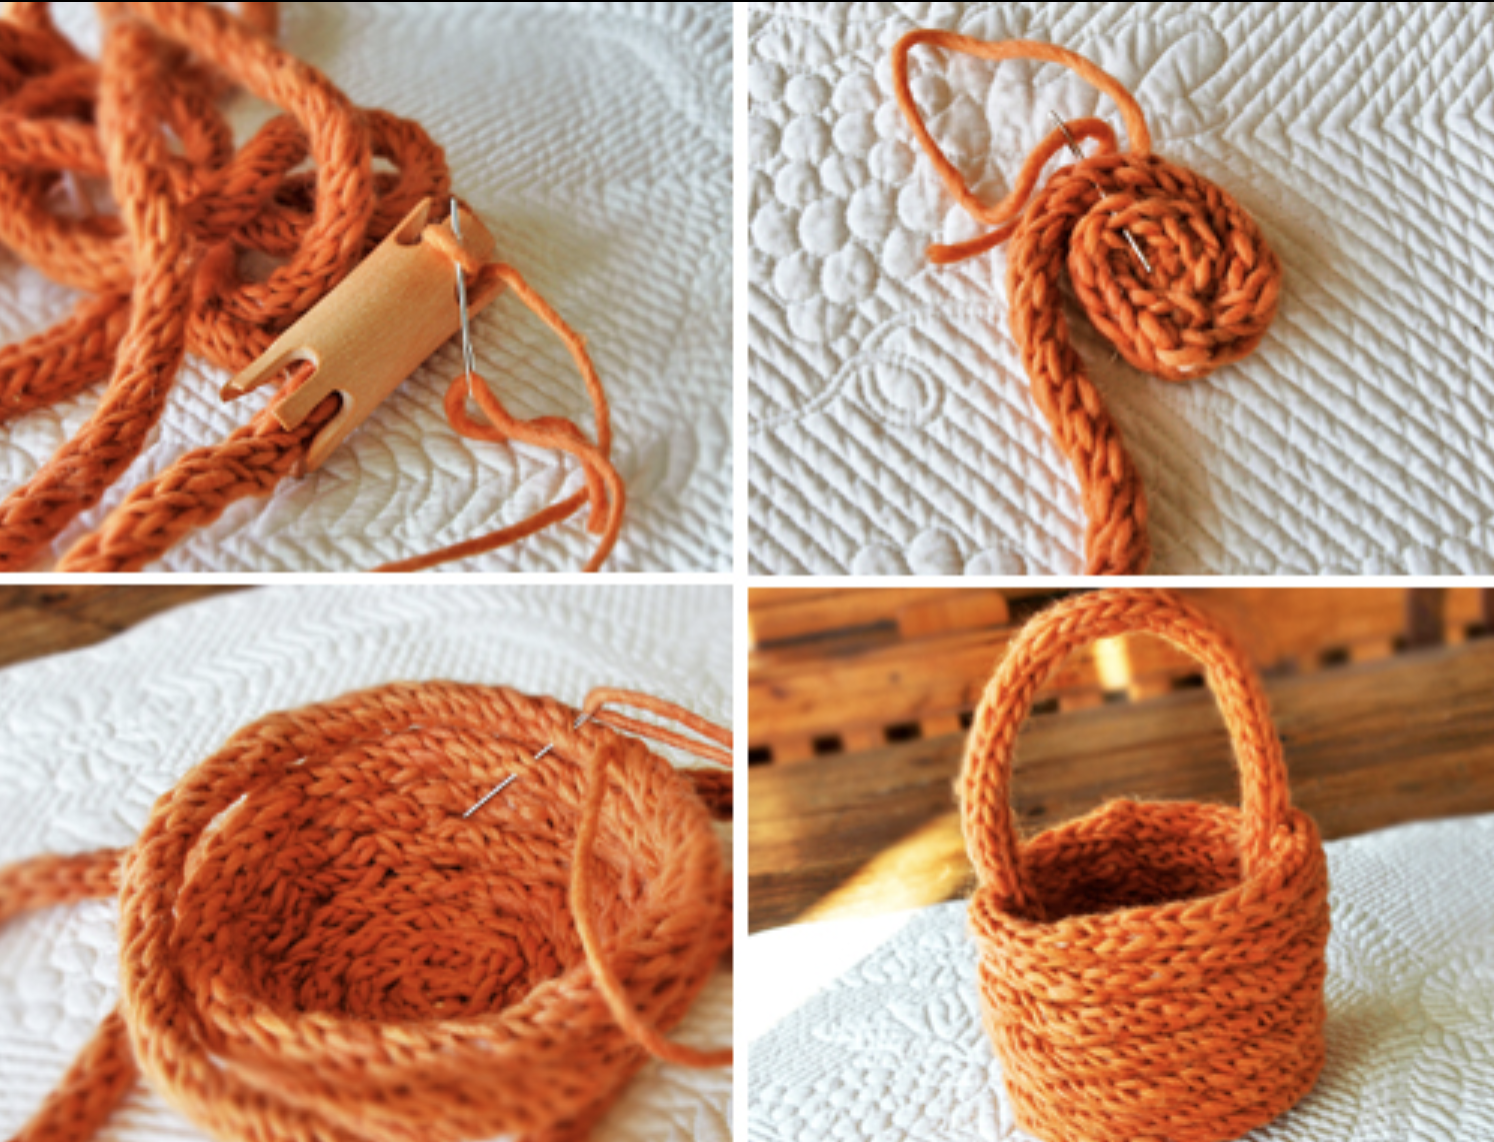 Cheap and Easy DIY French Knitter : 9 Steps (with Pictures) - Instructables